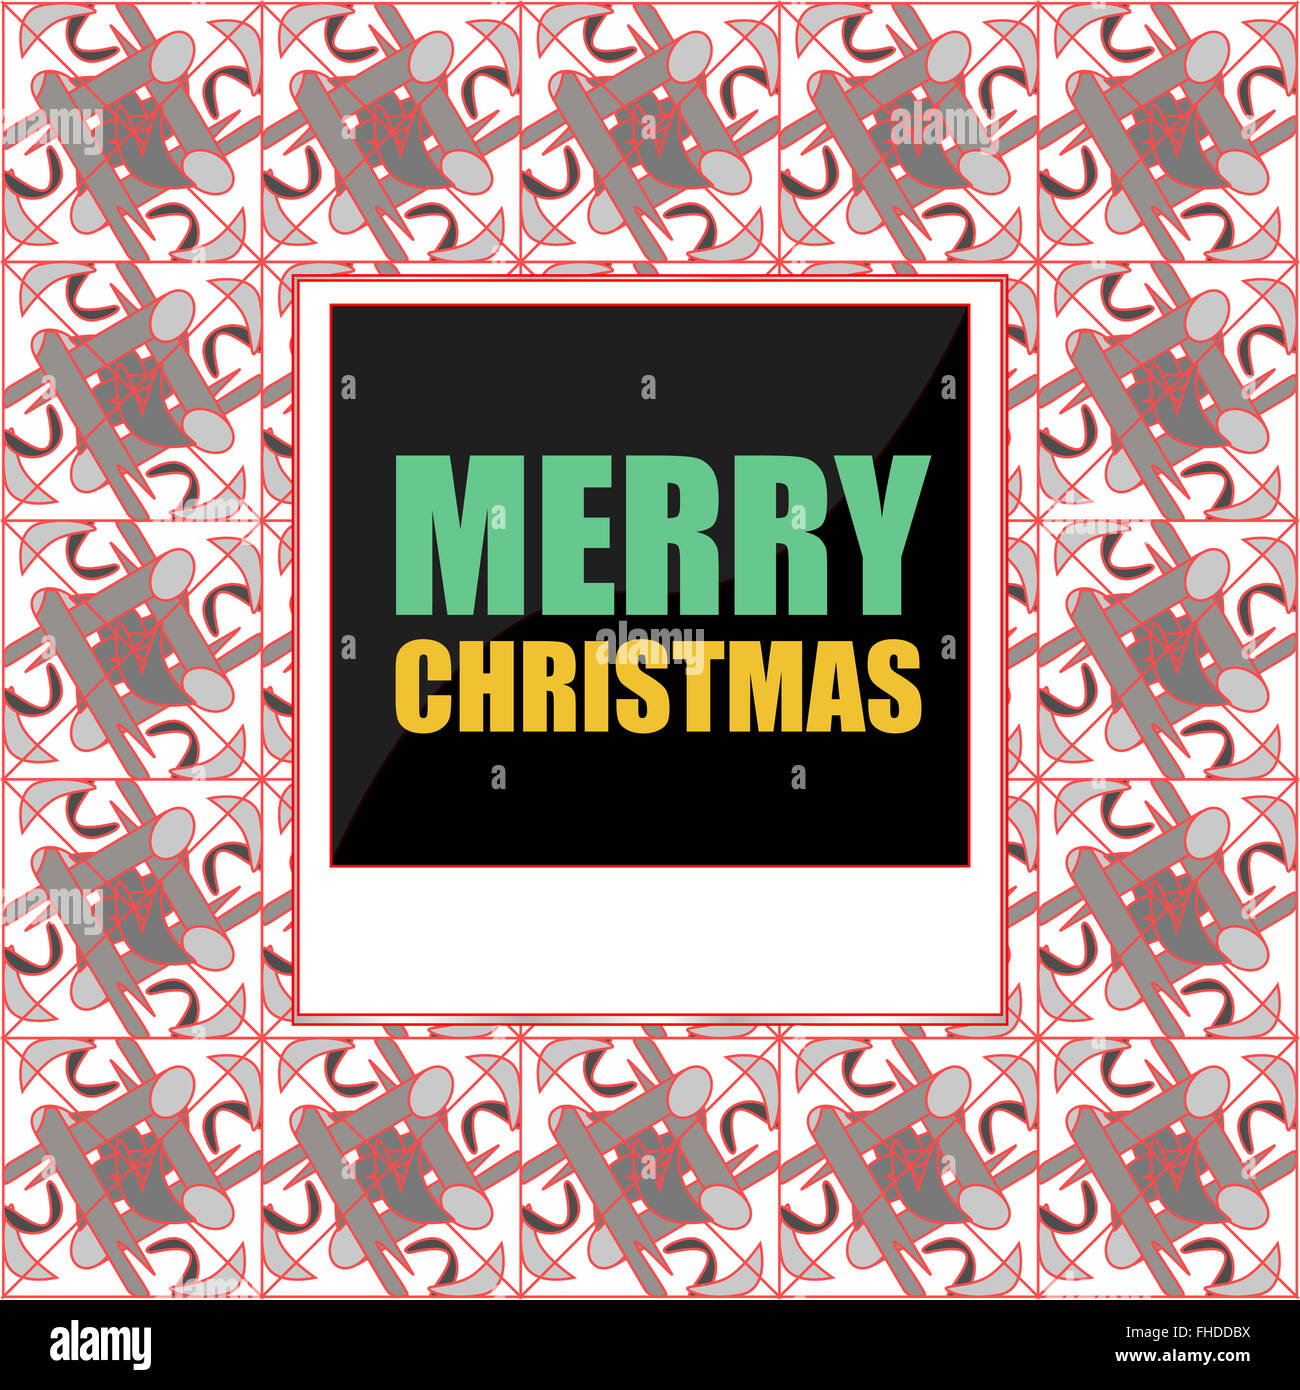 Merry Christmas lettering Greeting Card. Photo Frame. Vector illustration Stock Photo